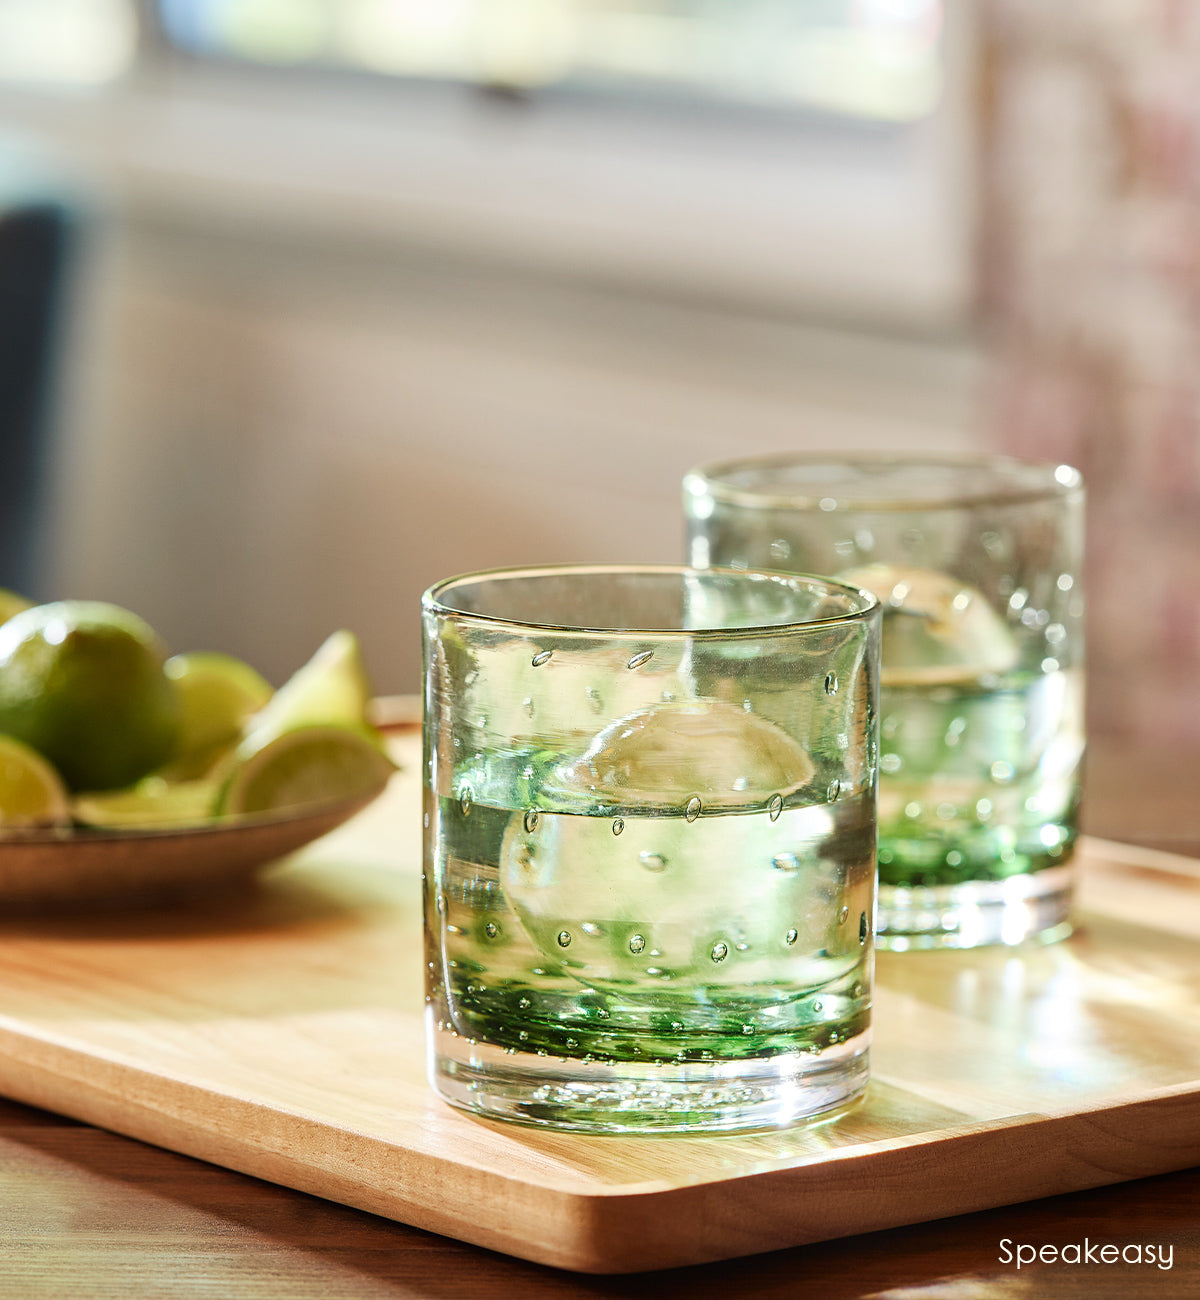 two Speakeasy rockers, dark green hand-blown glass lowball drinking glasses with a bubble pattern. sitting on top of a wood cutting board next to limes.